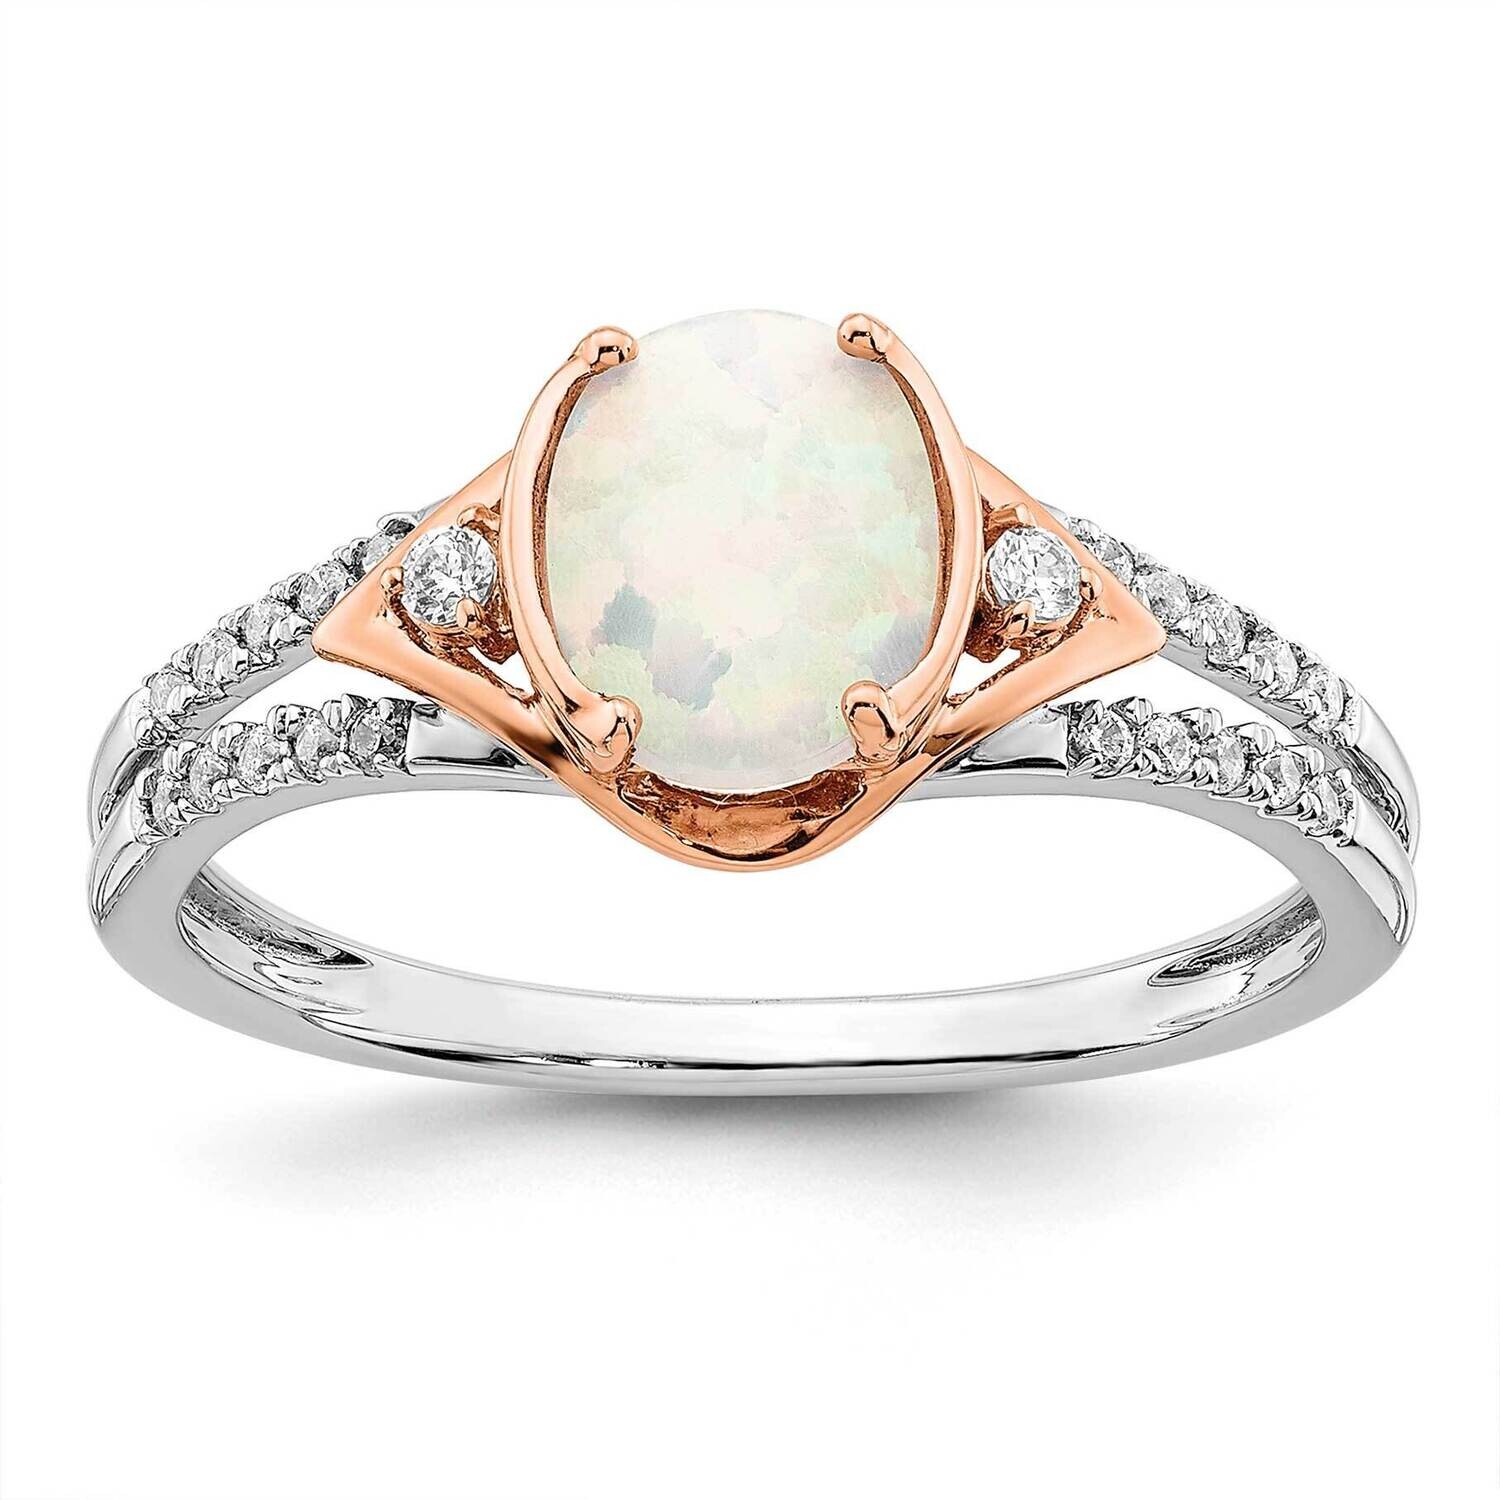 Created Opal Diamond Ring 14k Two-Tone Gold RM5958-OP-016-WRA